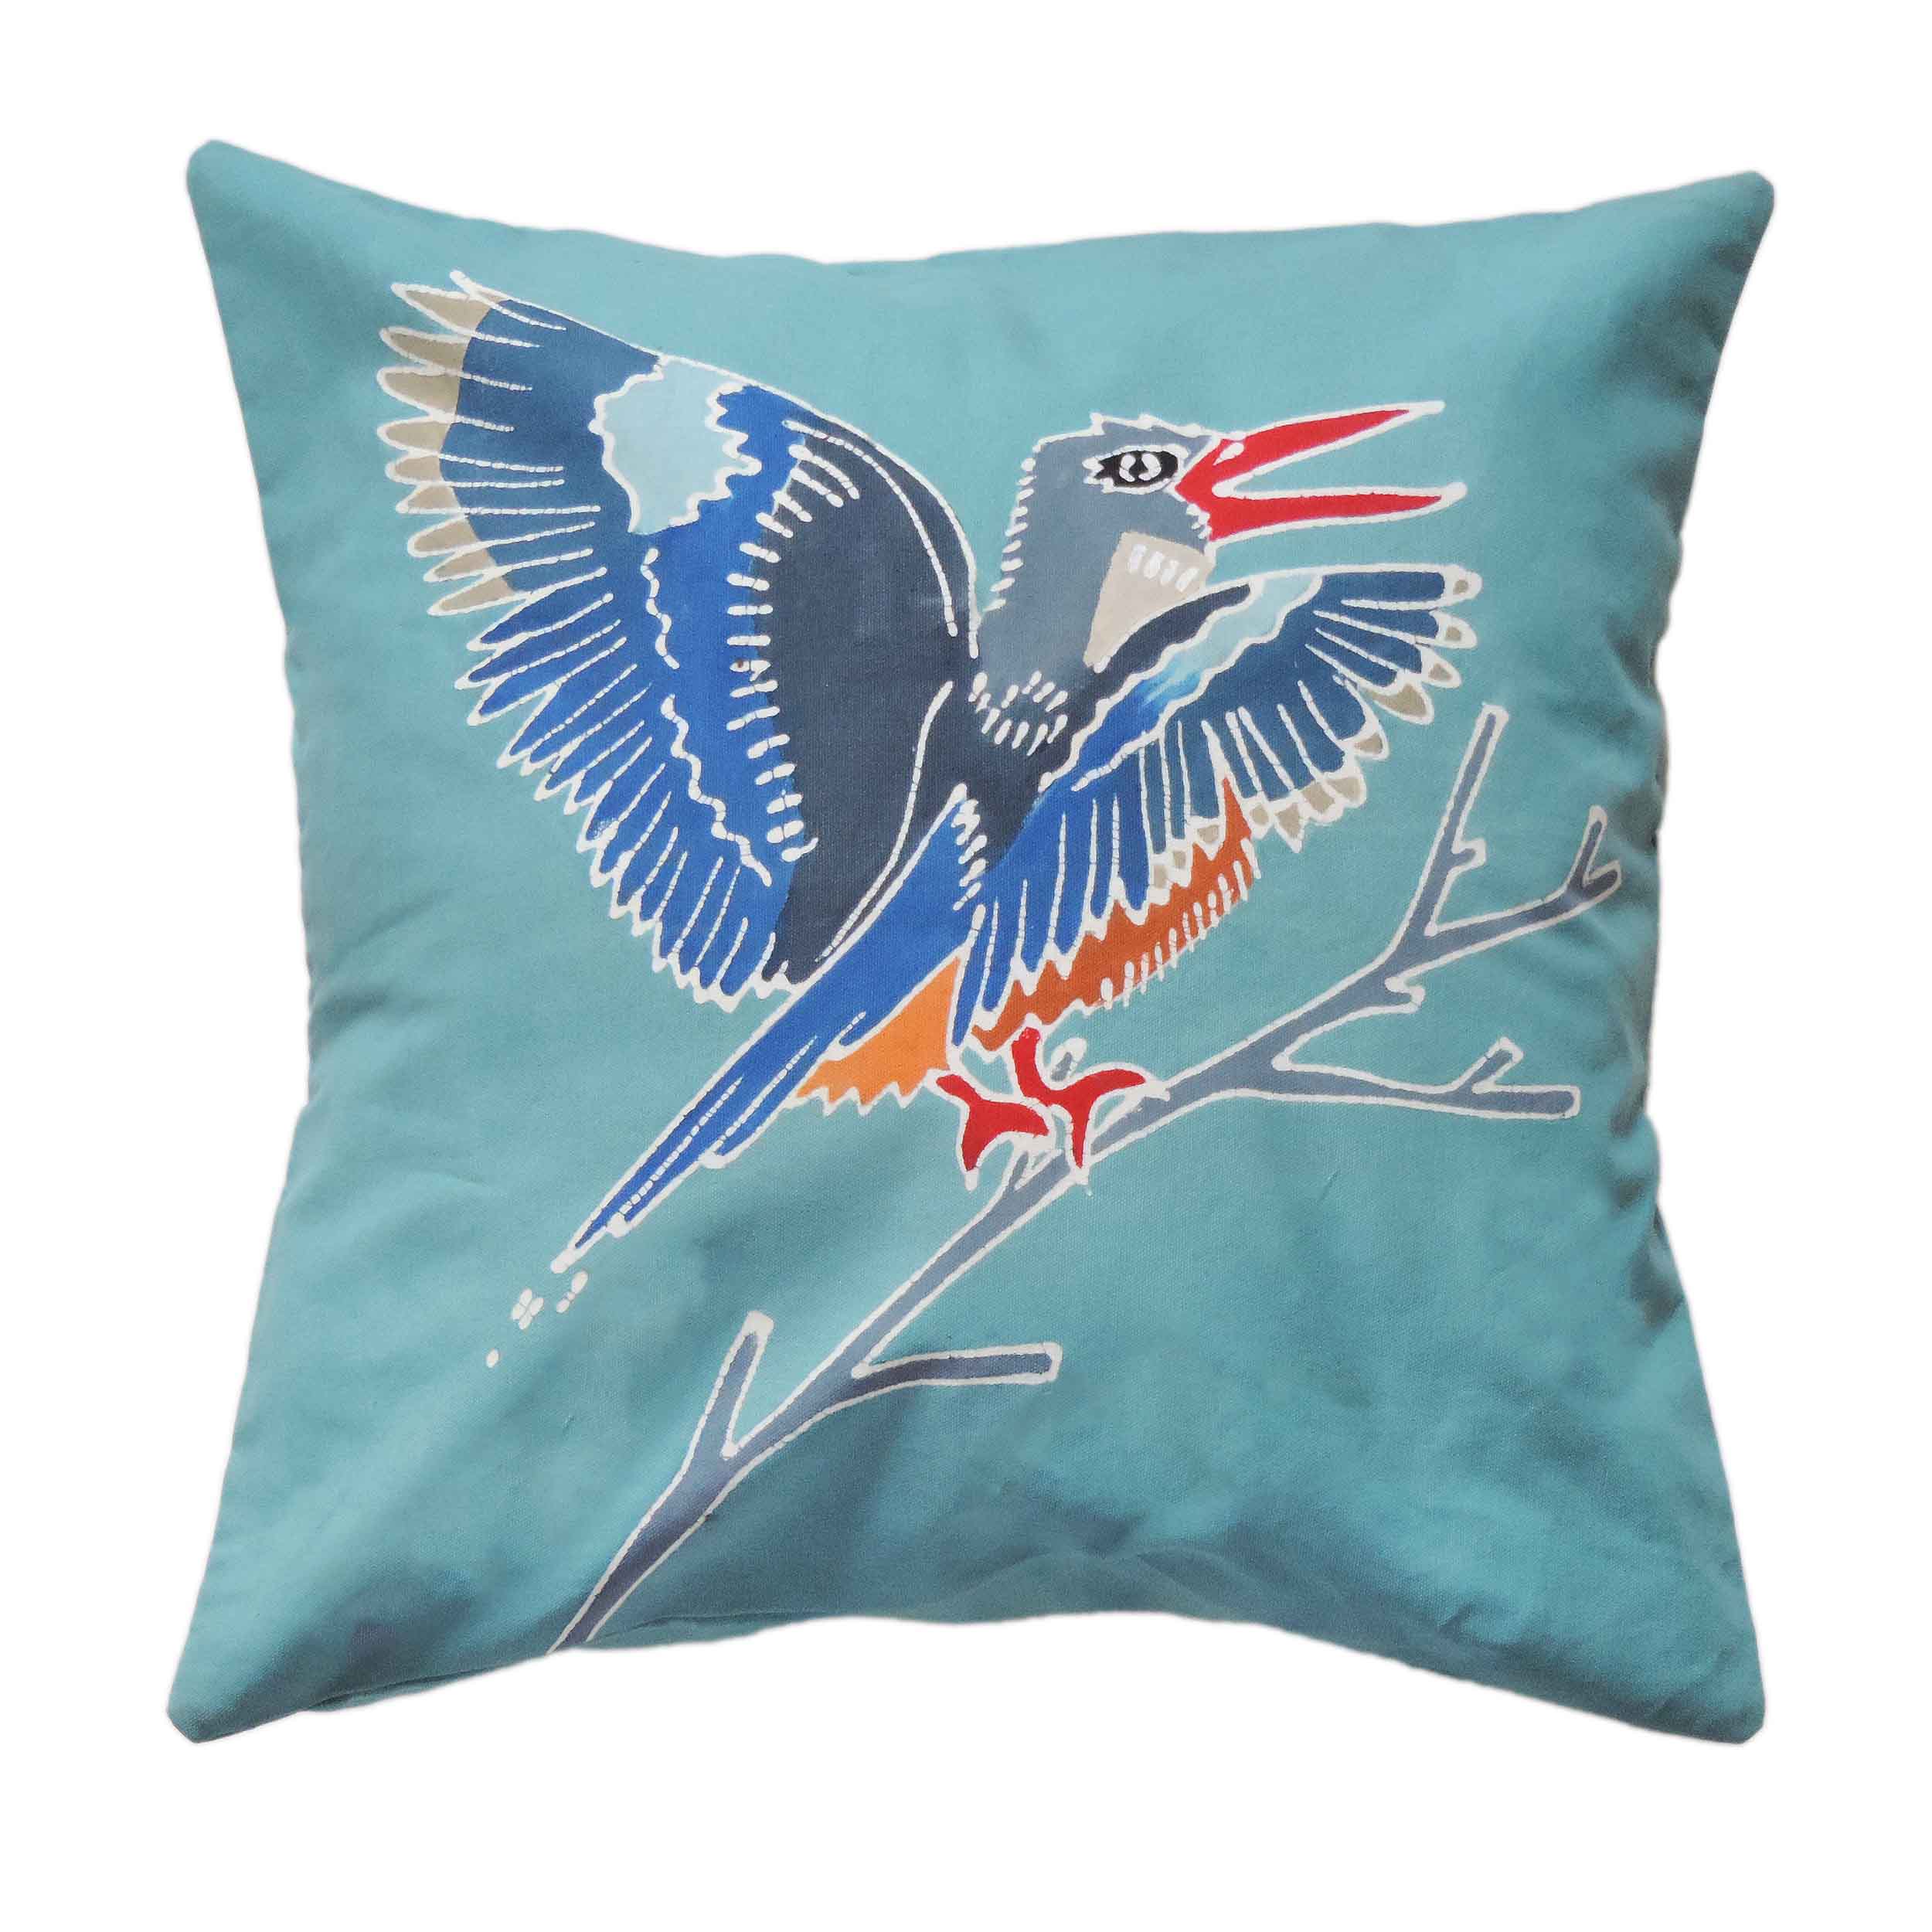 Papiko Bird Decor, Grey Headed Kingfisher Cushion Cover by TRIBAL TEXTILES, African Made Design